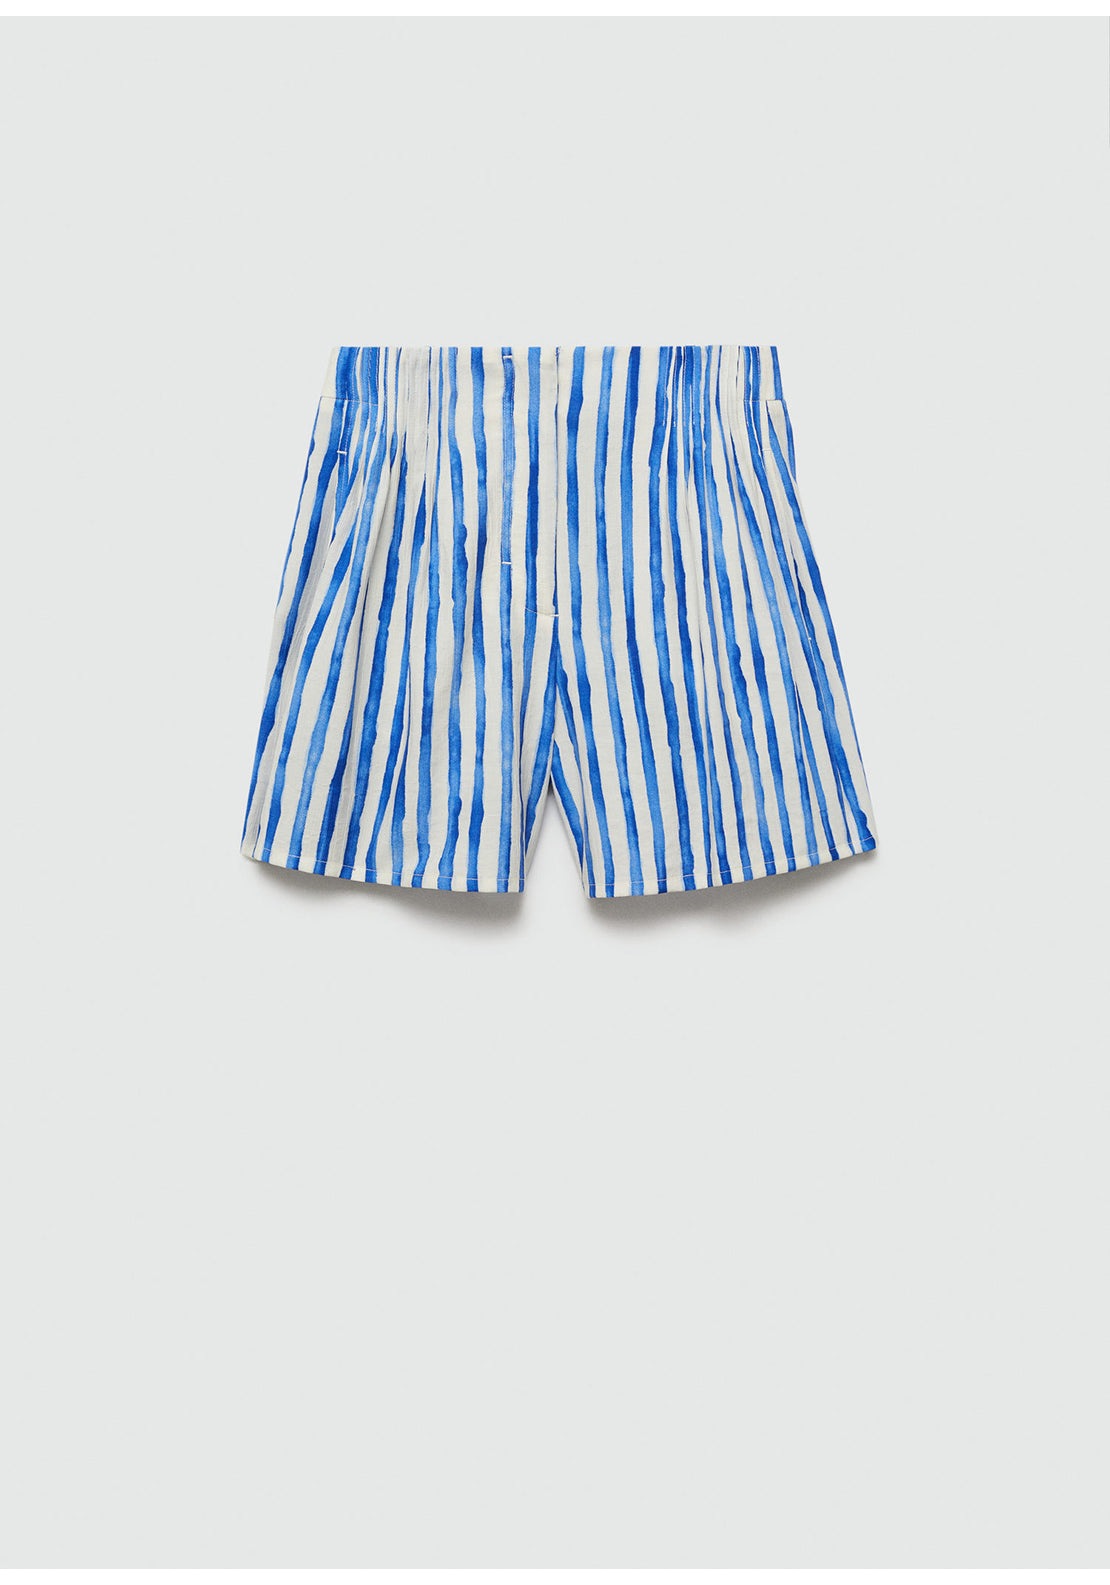 Mango Striped high-waisted shorts 5 Shaws Department Stores